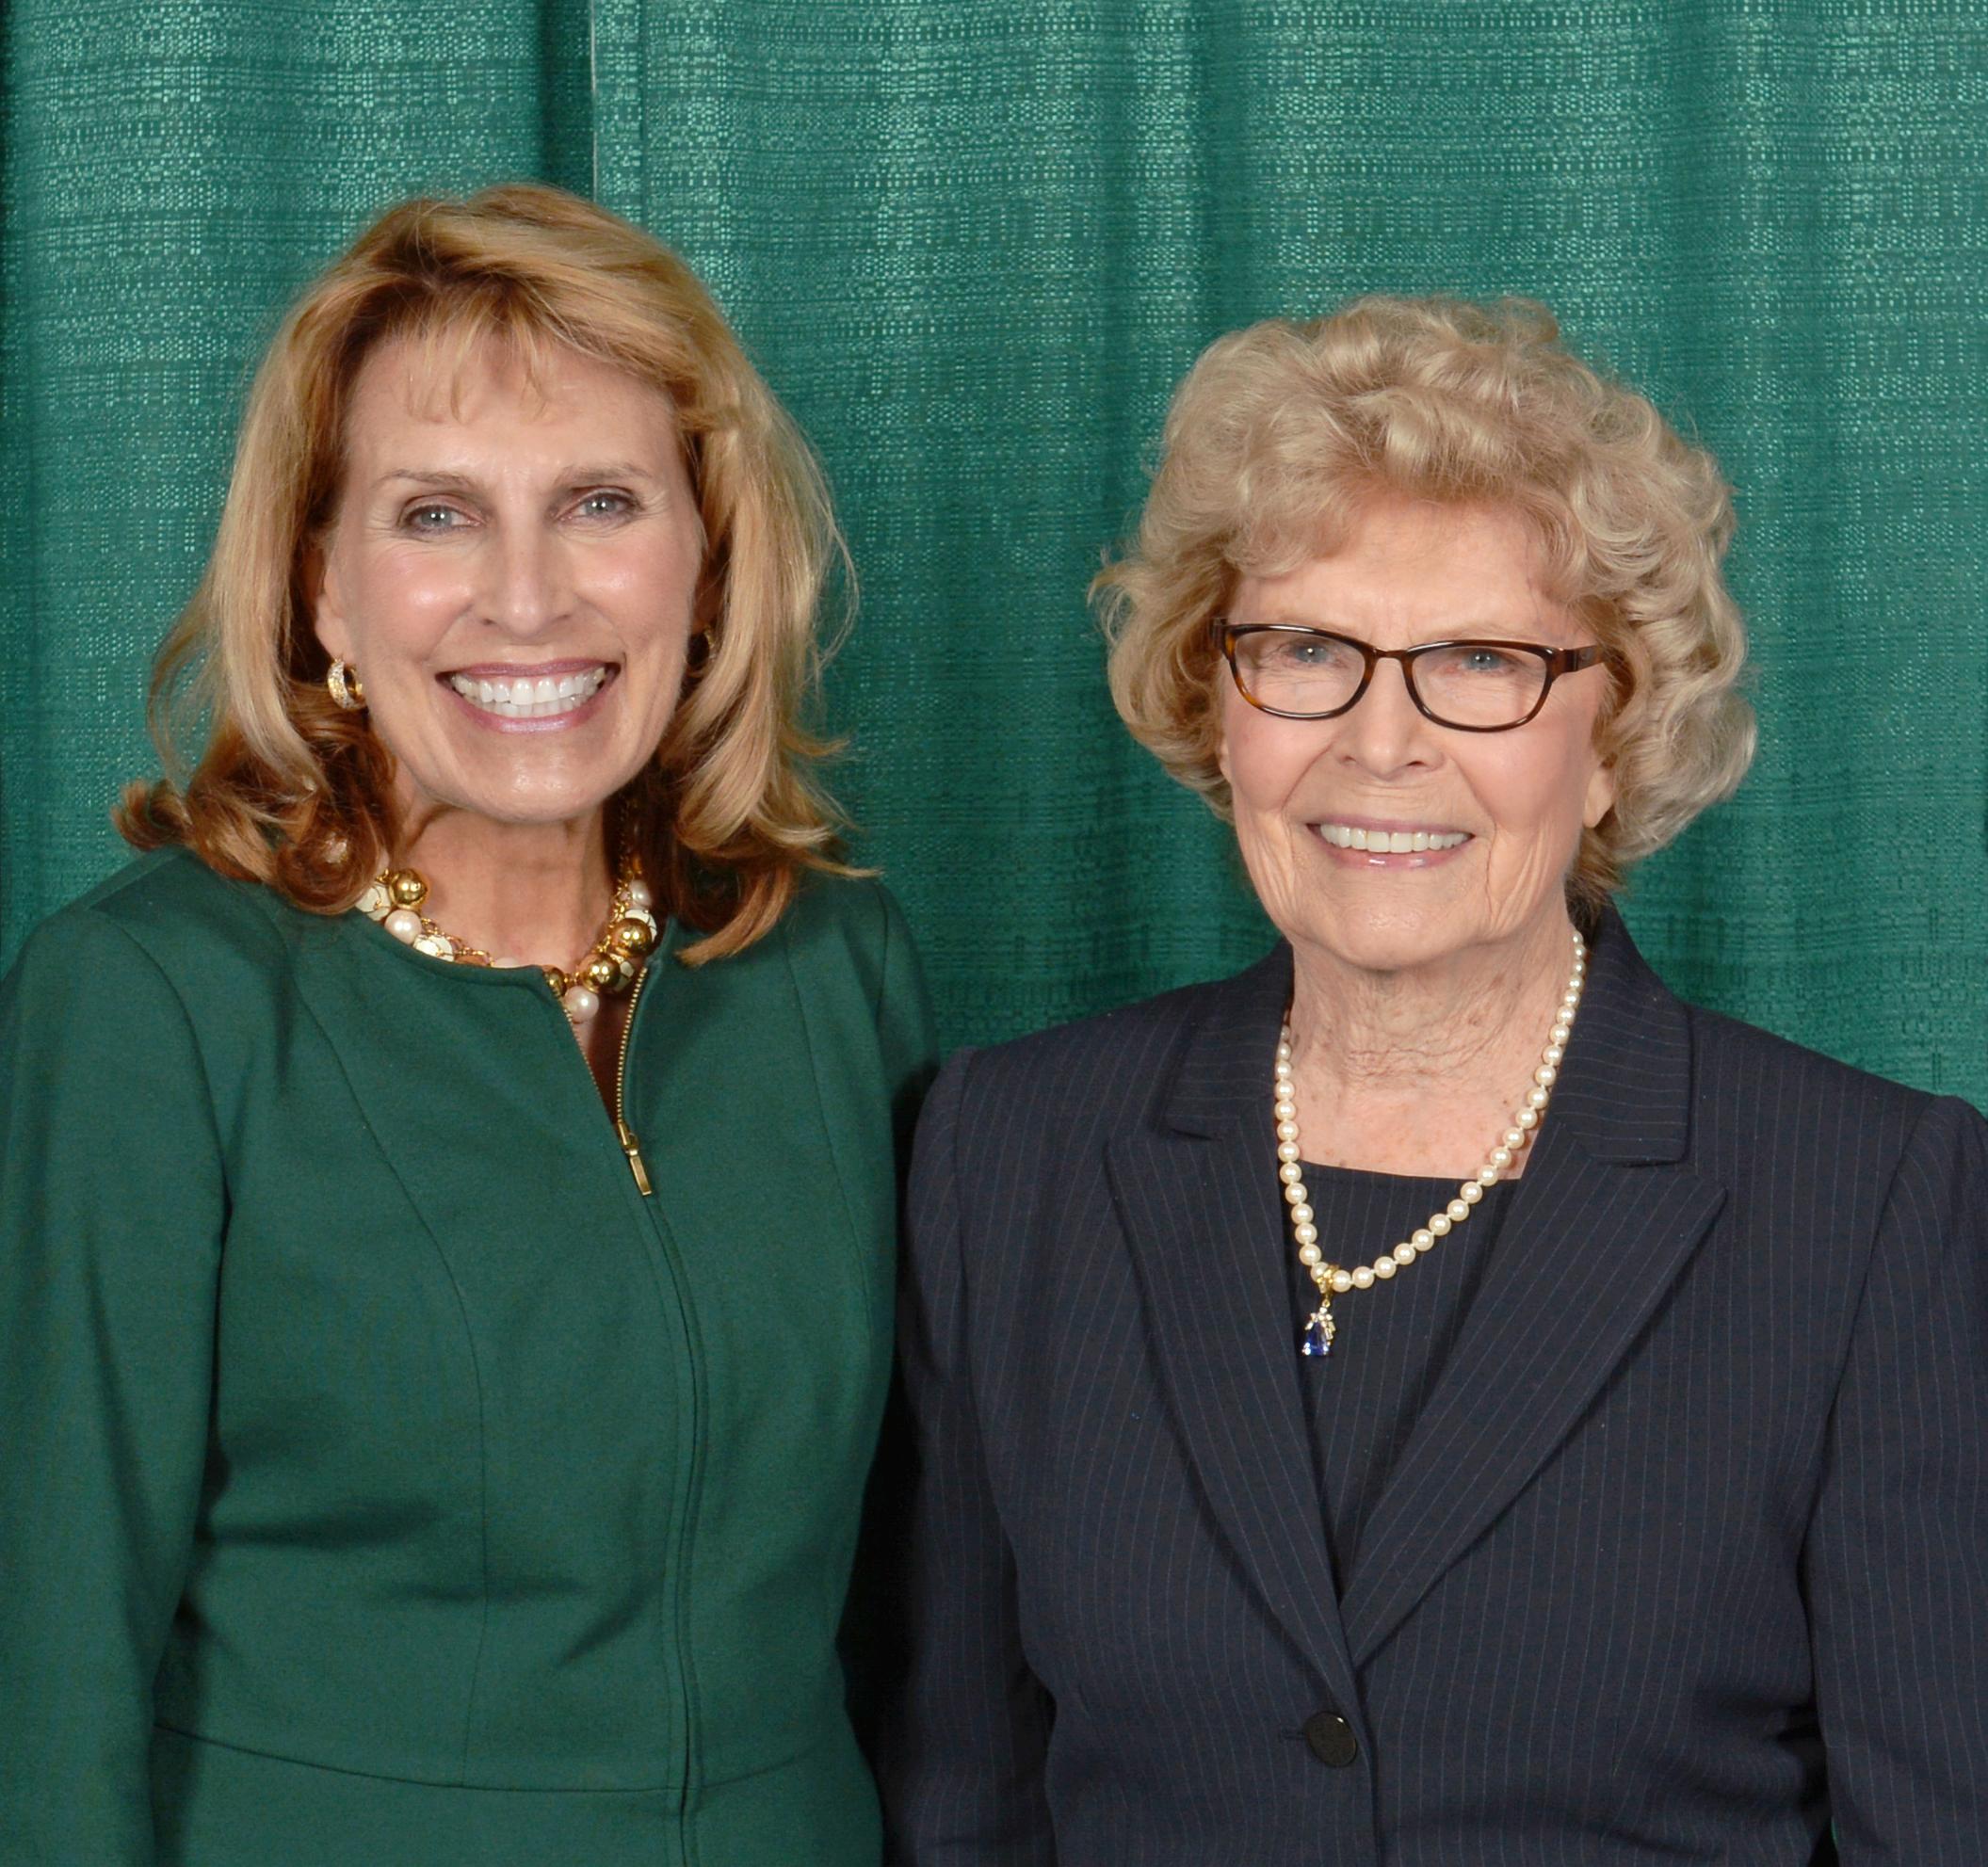 SUNY Oswego President Deborah F. Stanley and Dr. Barbara Shineman at the dedication on Oct. 4, 2013, of the Richard S. Shineman Center for Science, Engineering and Innovation.